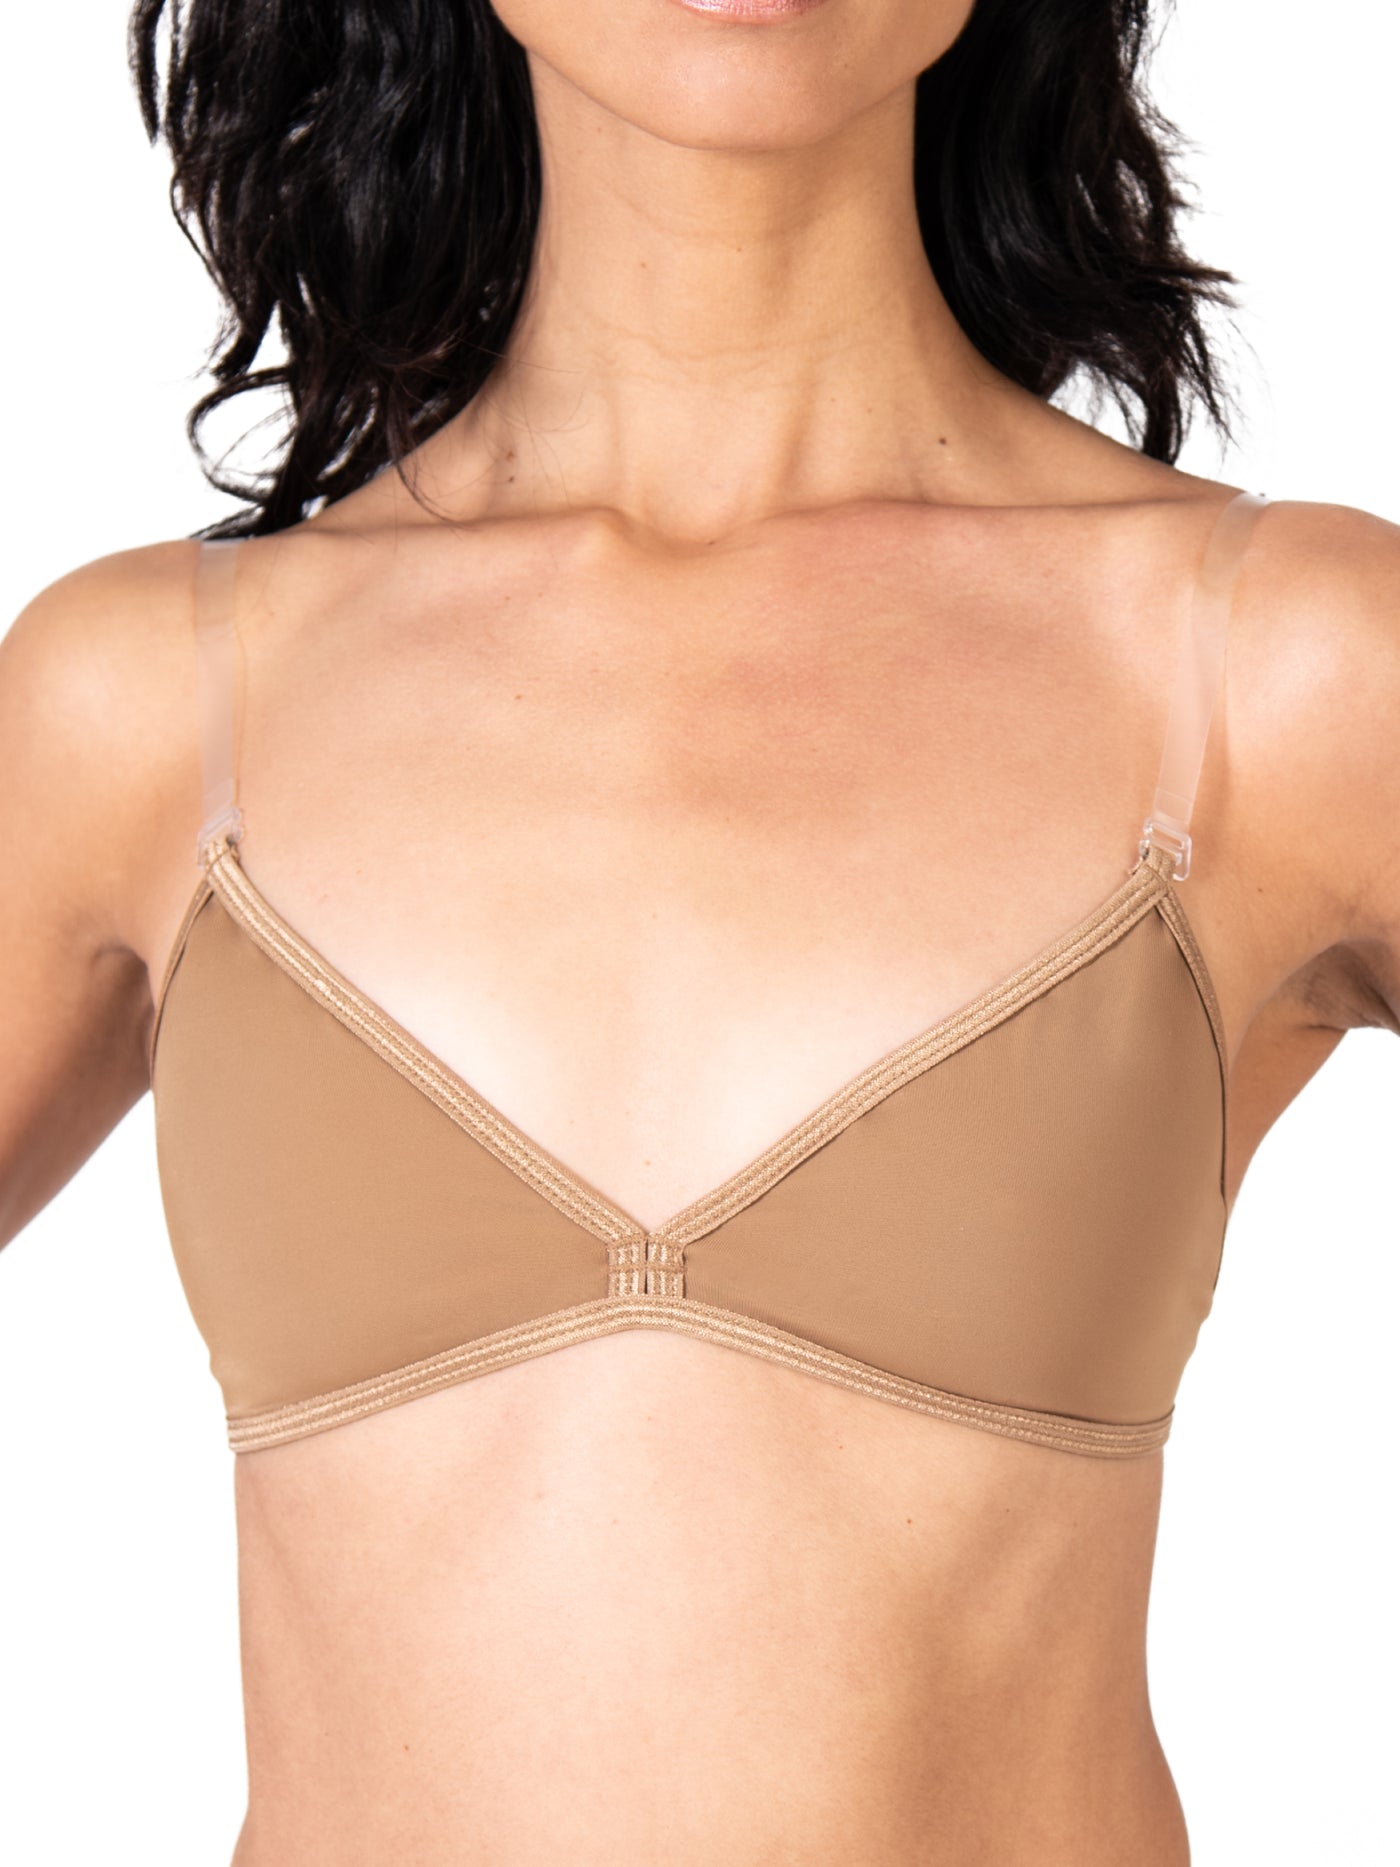 Bodywrappers Deep Plunge Removable Padded Cup Bra (291)